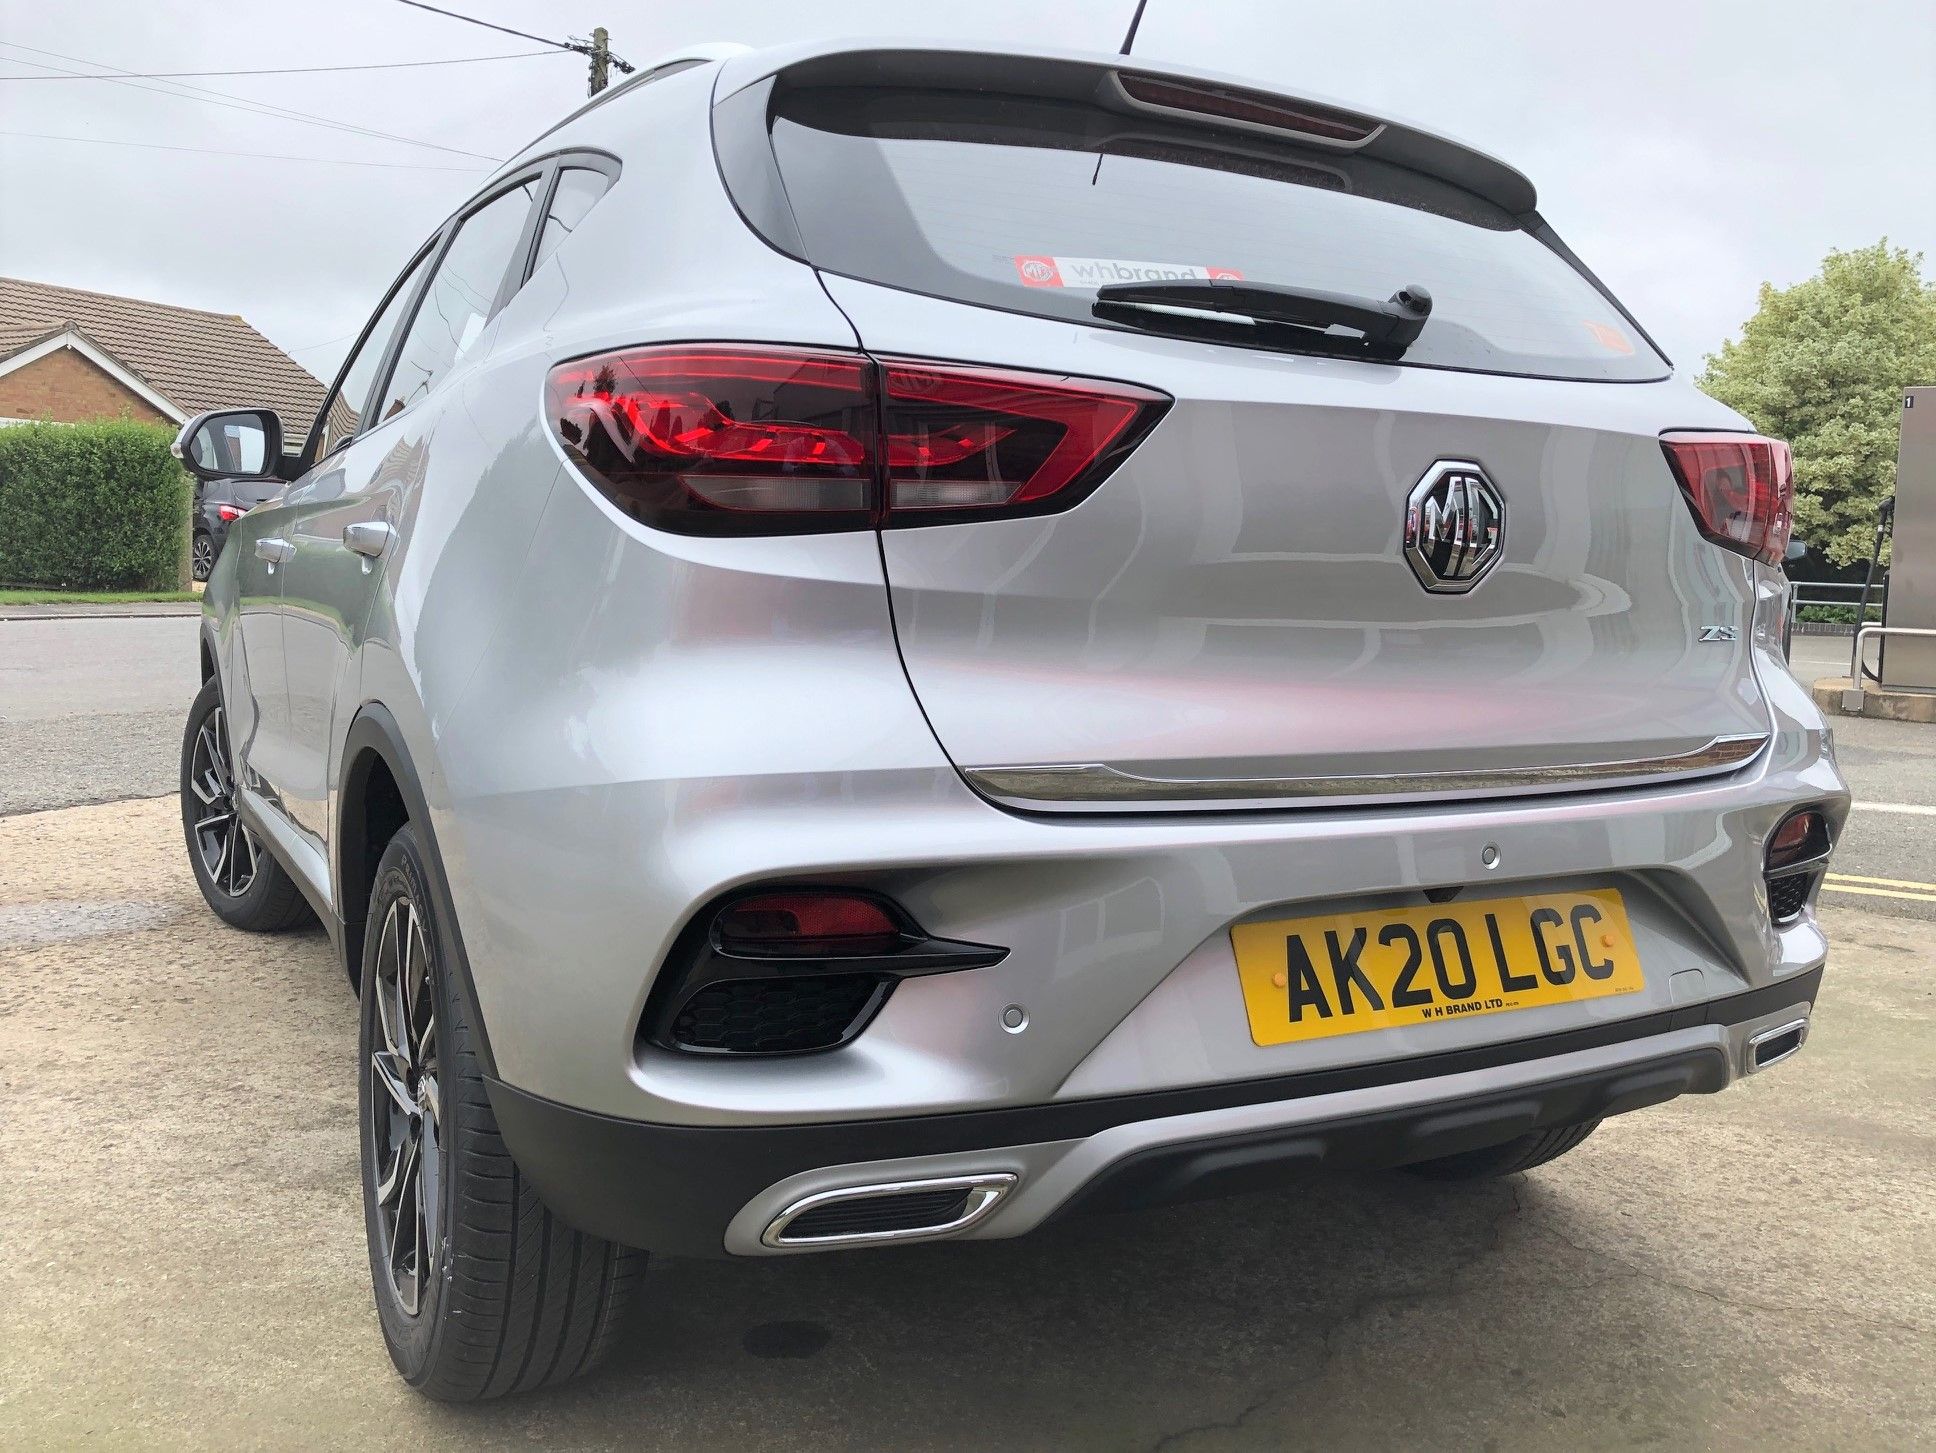 The 2020 New MG ZS is now here at W H Brand!